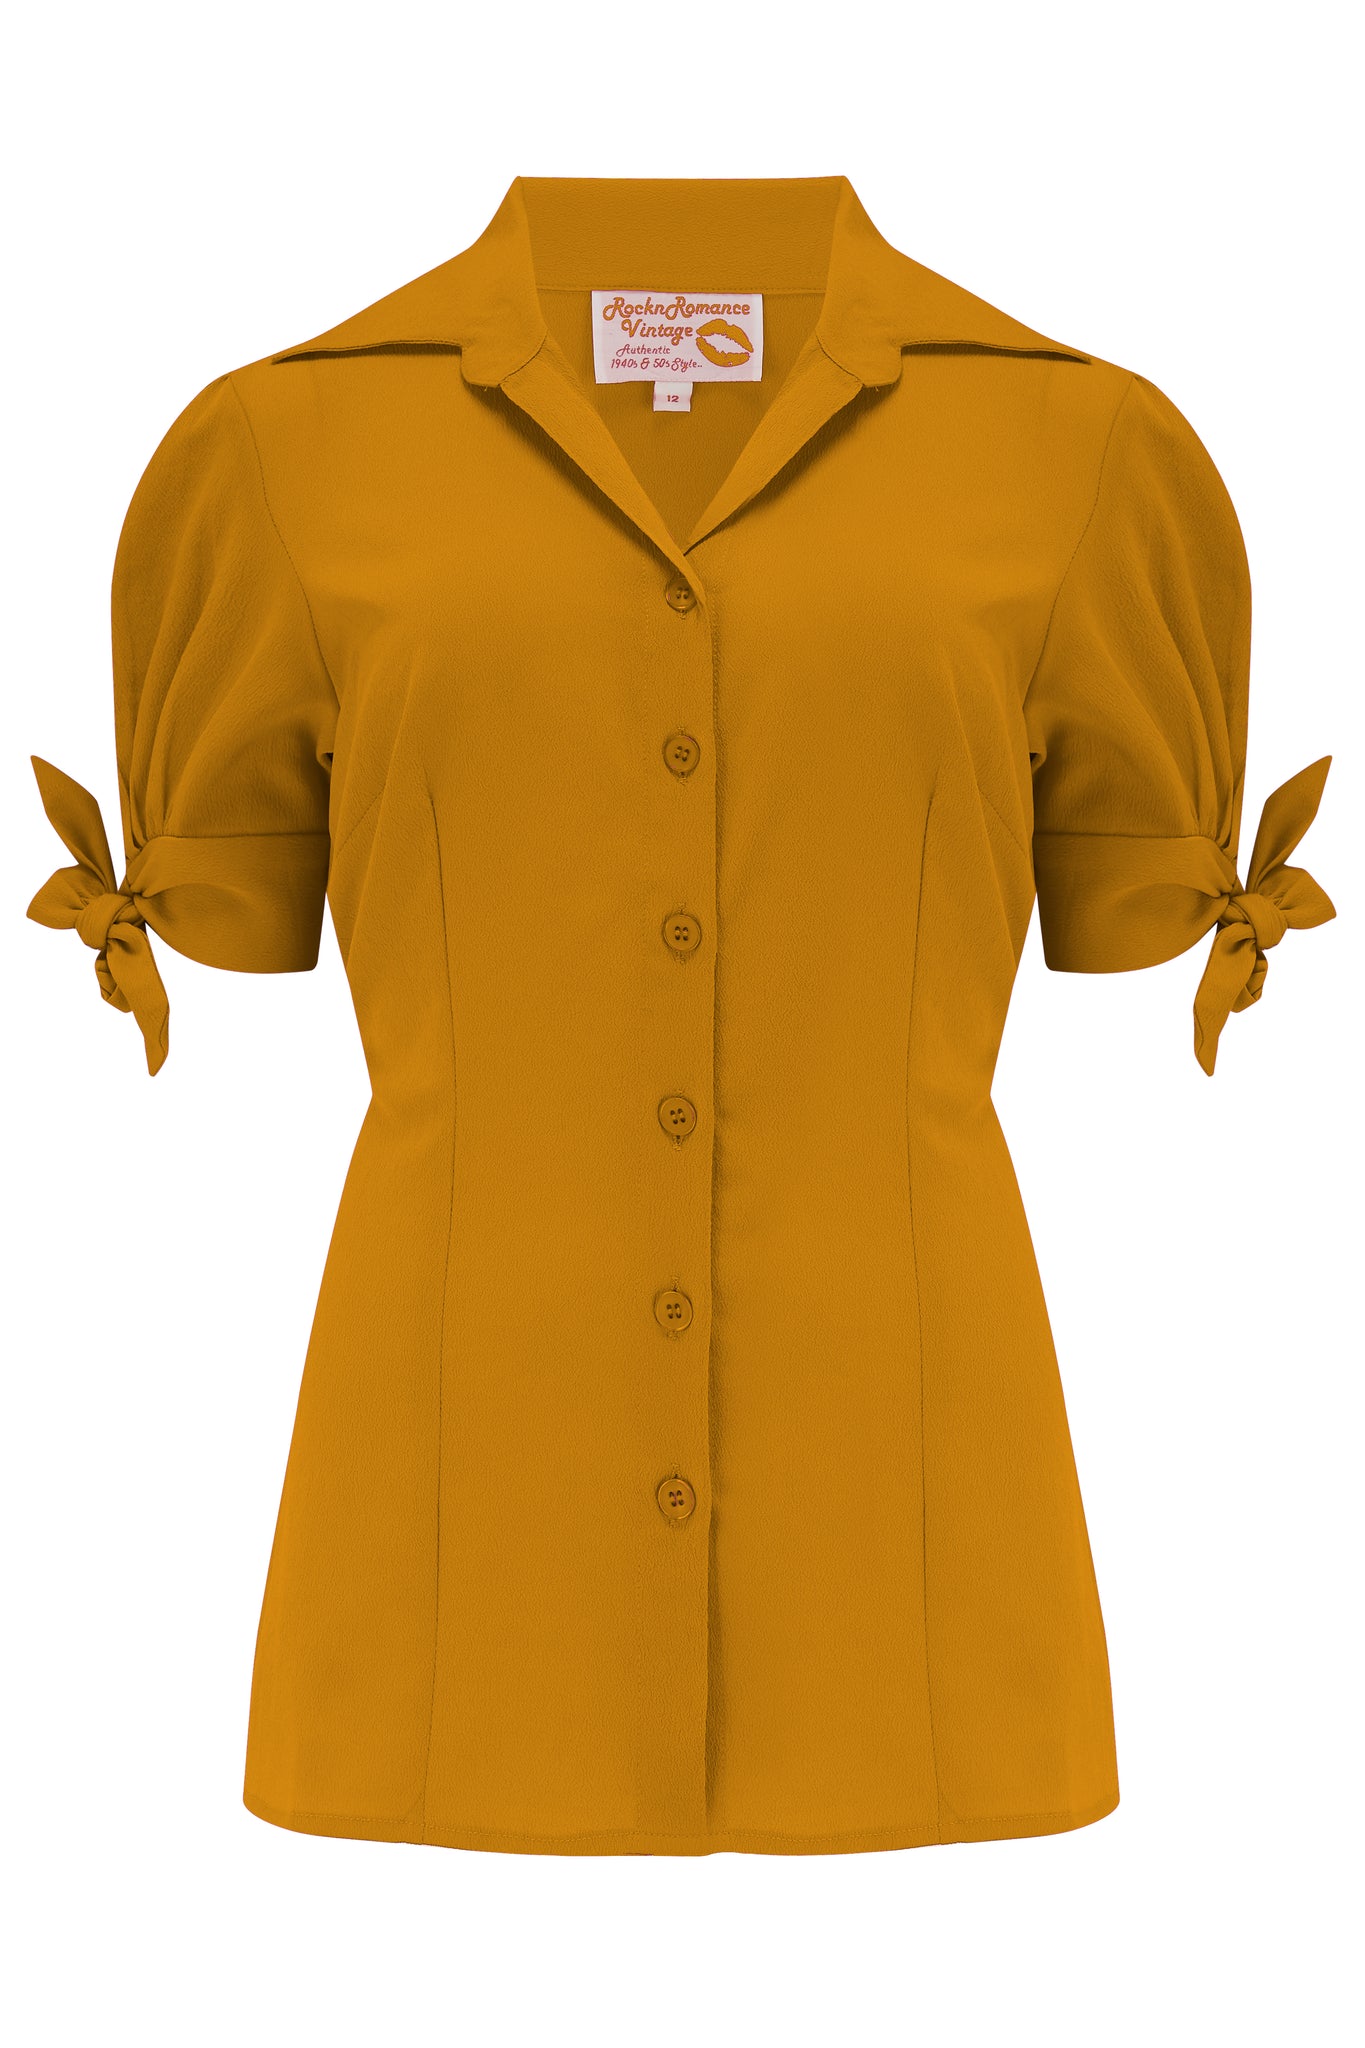 **Sample Sale** The "Jane" Blouse in Solid Mustard, True & Authentic 1950s Vintage Style - Clothing and outfit Styles for Goodwood Revival and Viva Las Vegas Rockabilly Weekend